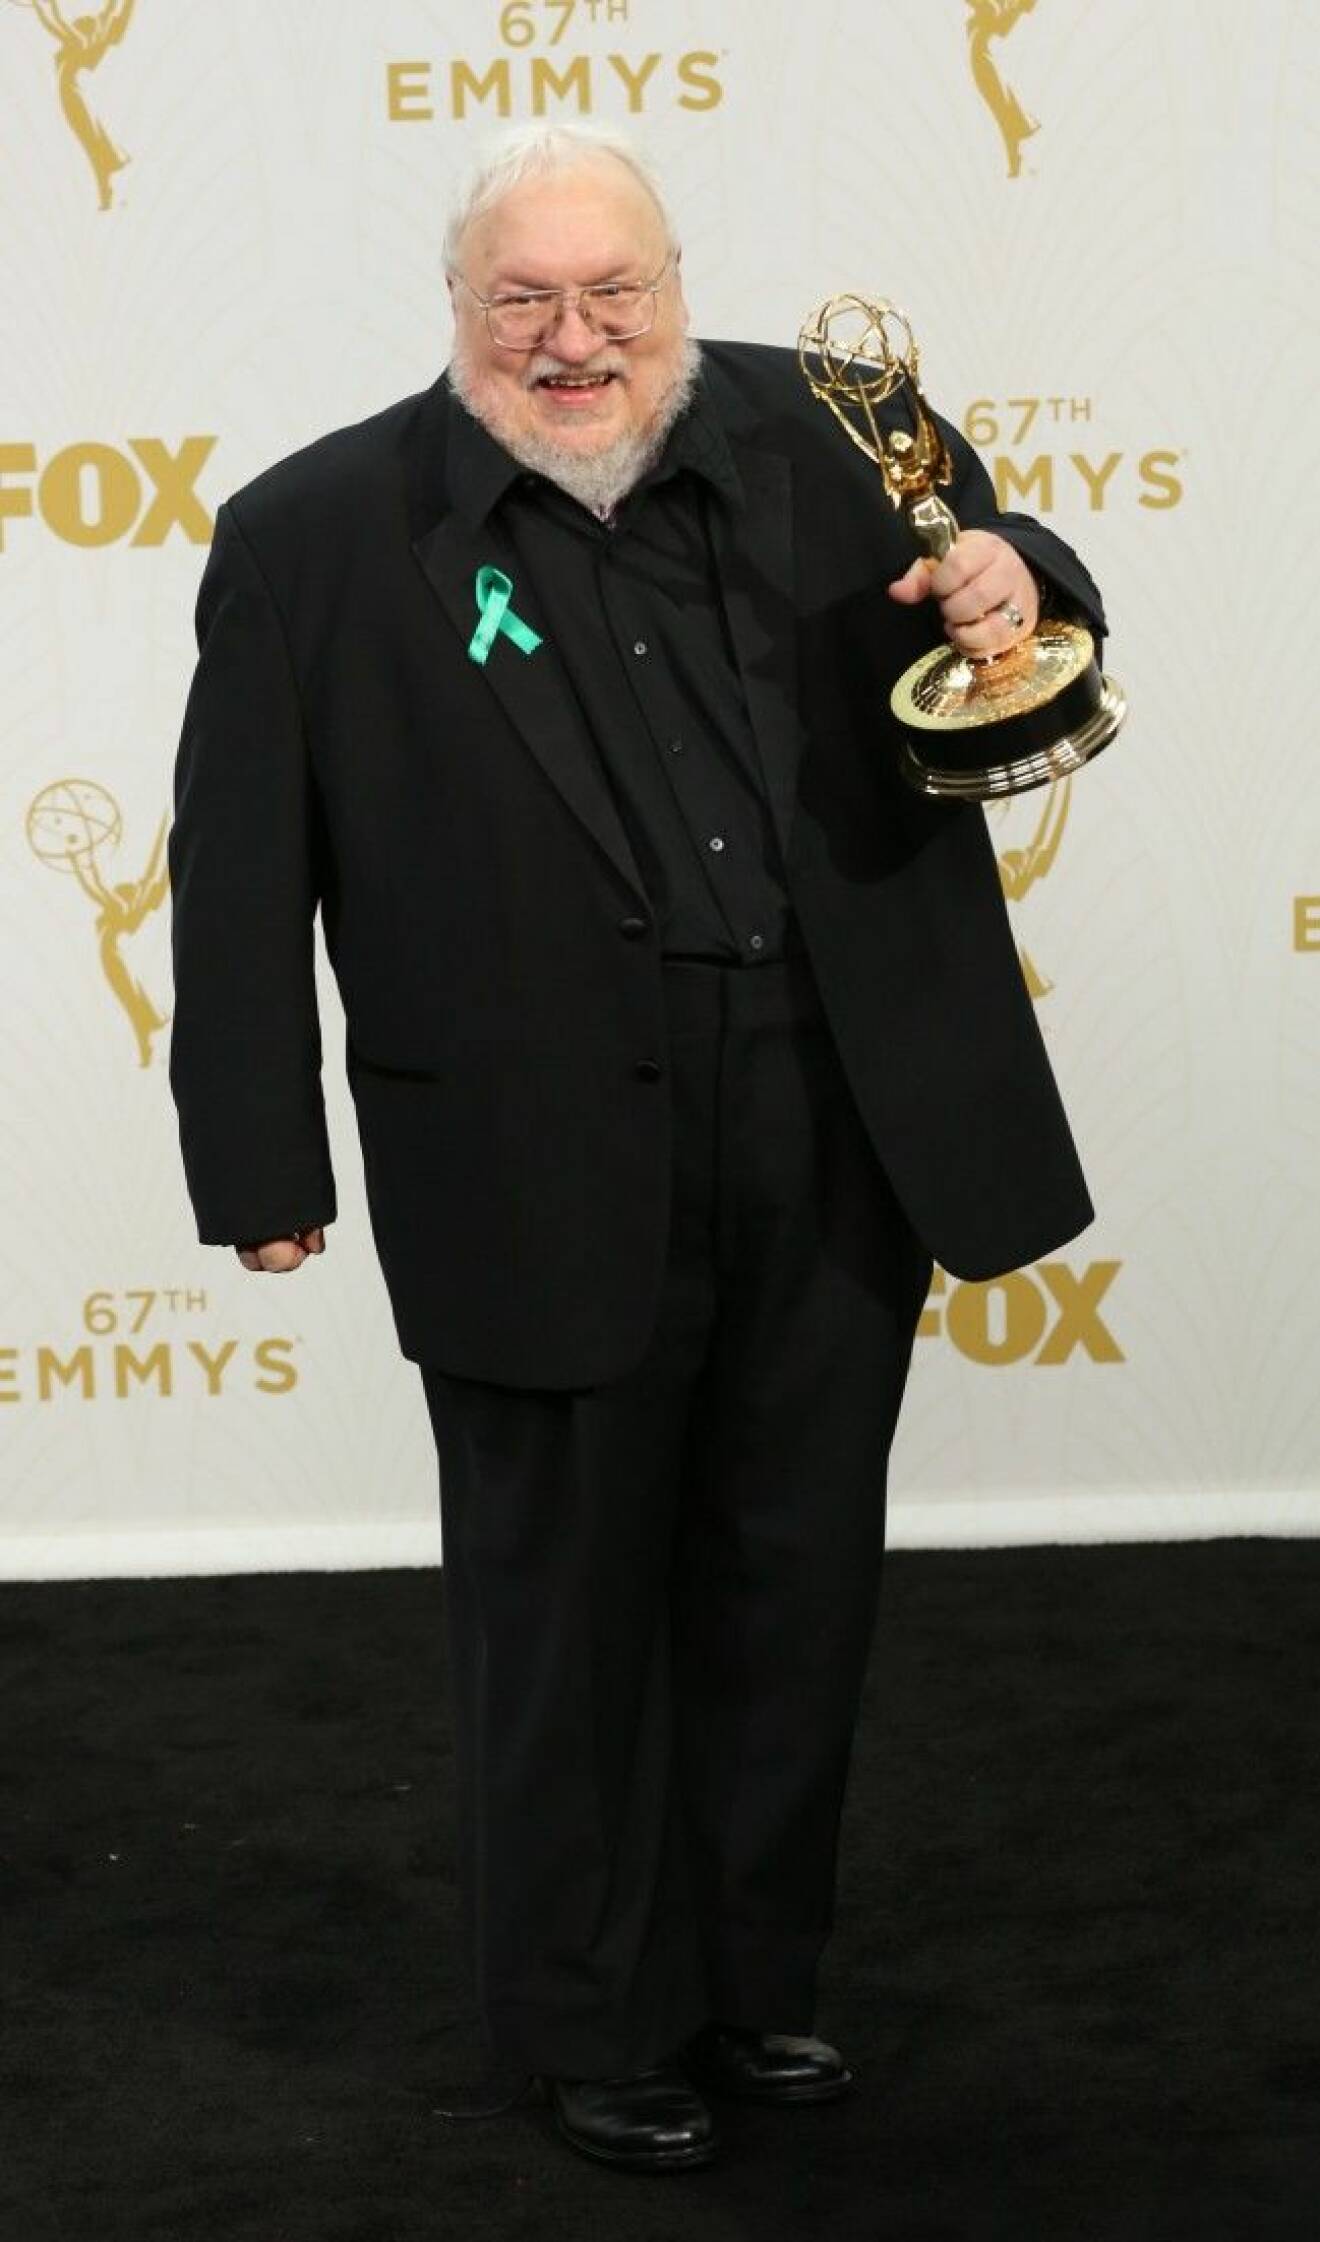 67th Annual Primetime Emmy Awards at Microsoft Theater - Press Room Featuring: George R.R. Martin Where: Los Angeles, California, United States When: 20 Sep 2015 Credit: Brian To/WENN.com